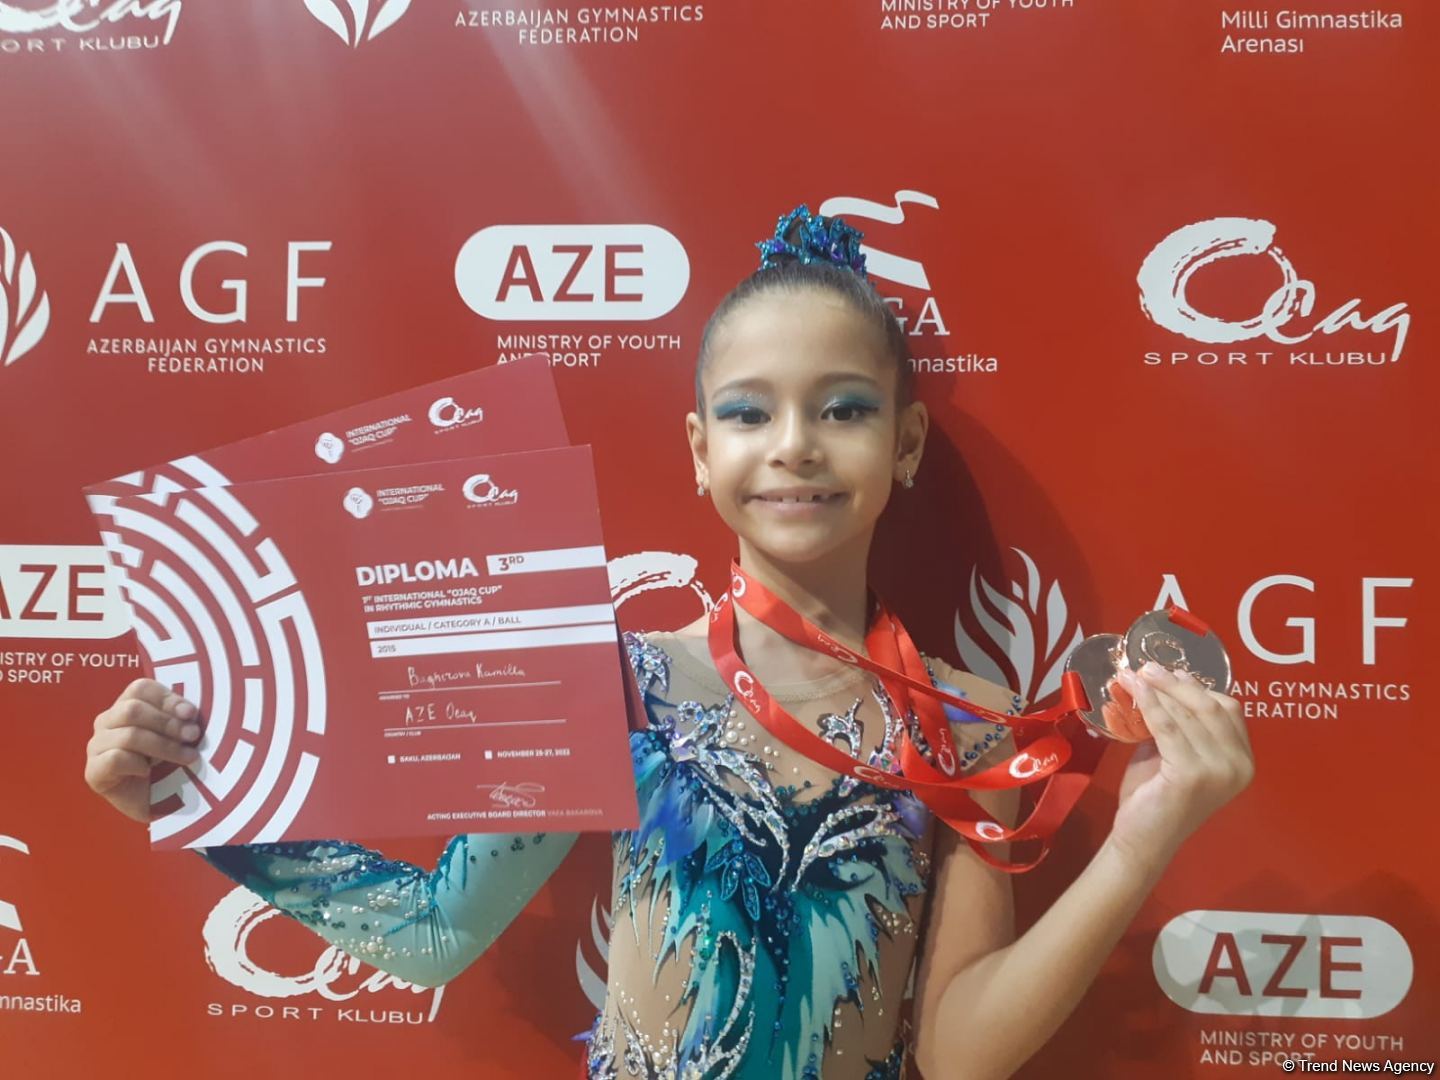 Participants of 1st International "Ojag Cup" united by great love for rhythmic gymnastics - bronze medalist of competition